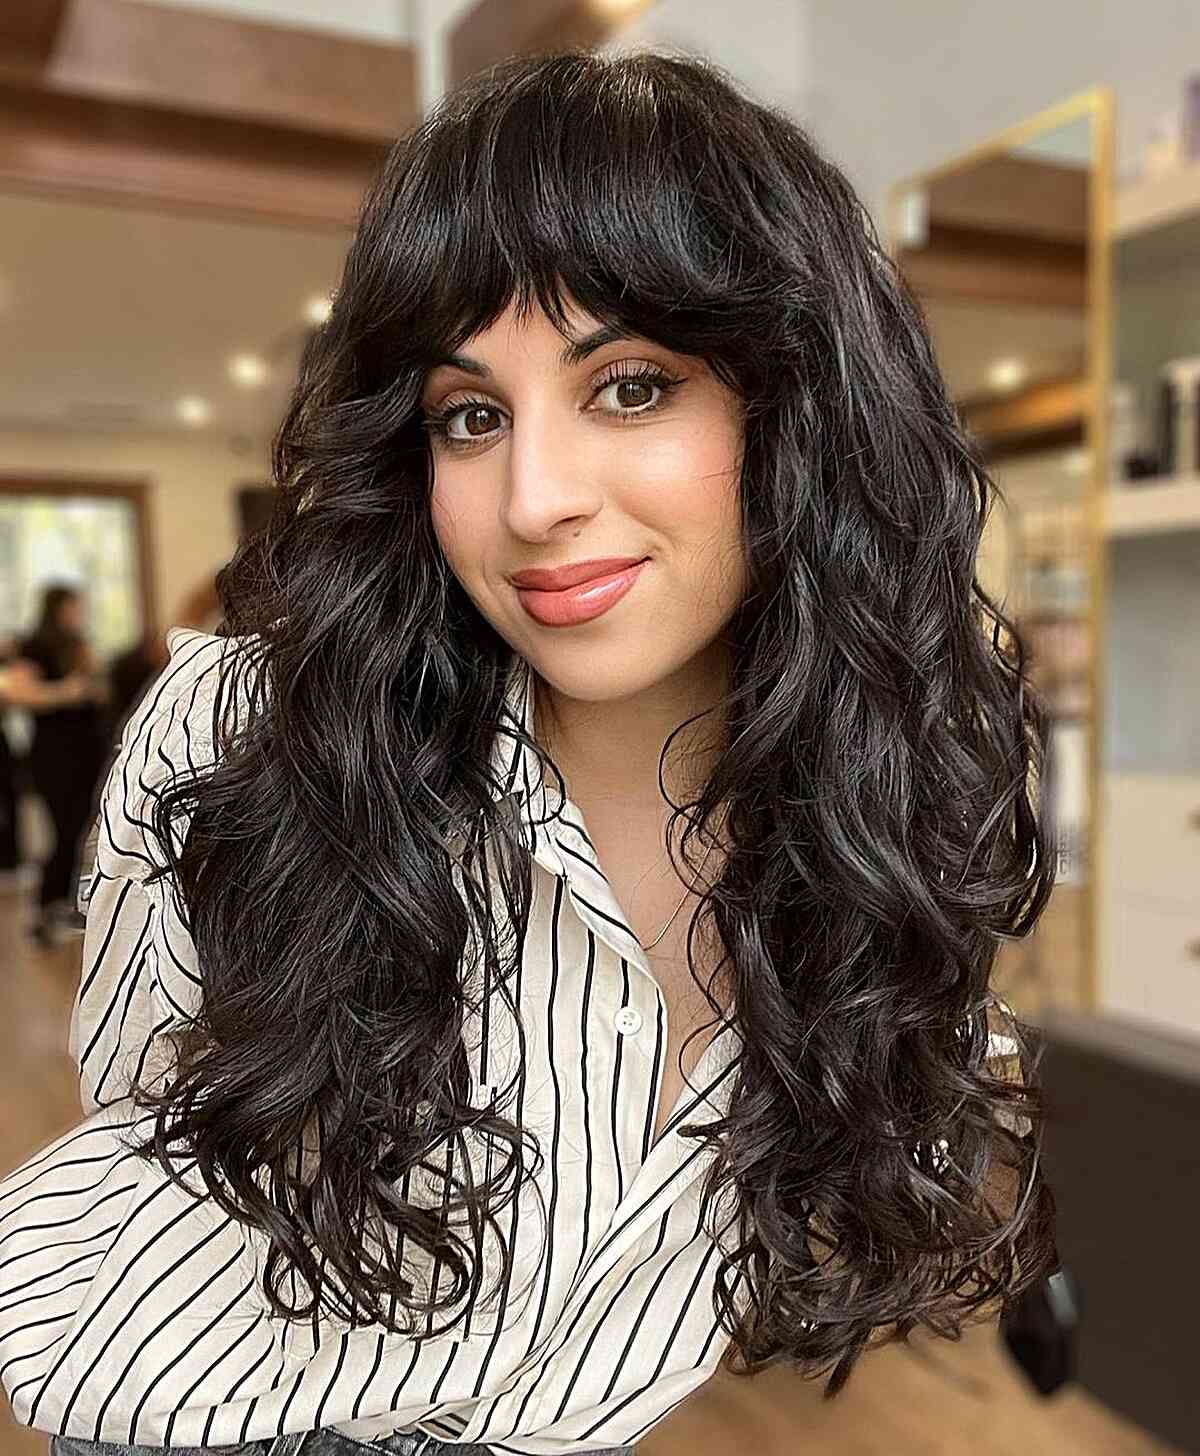 The Perfect Wavy Curly Shag for Long Hair and women with thick hair